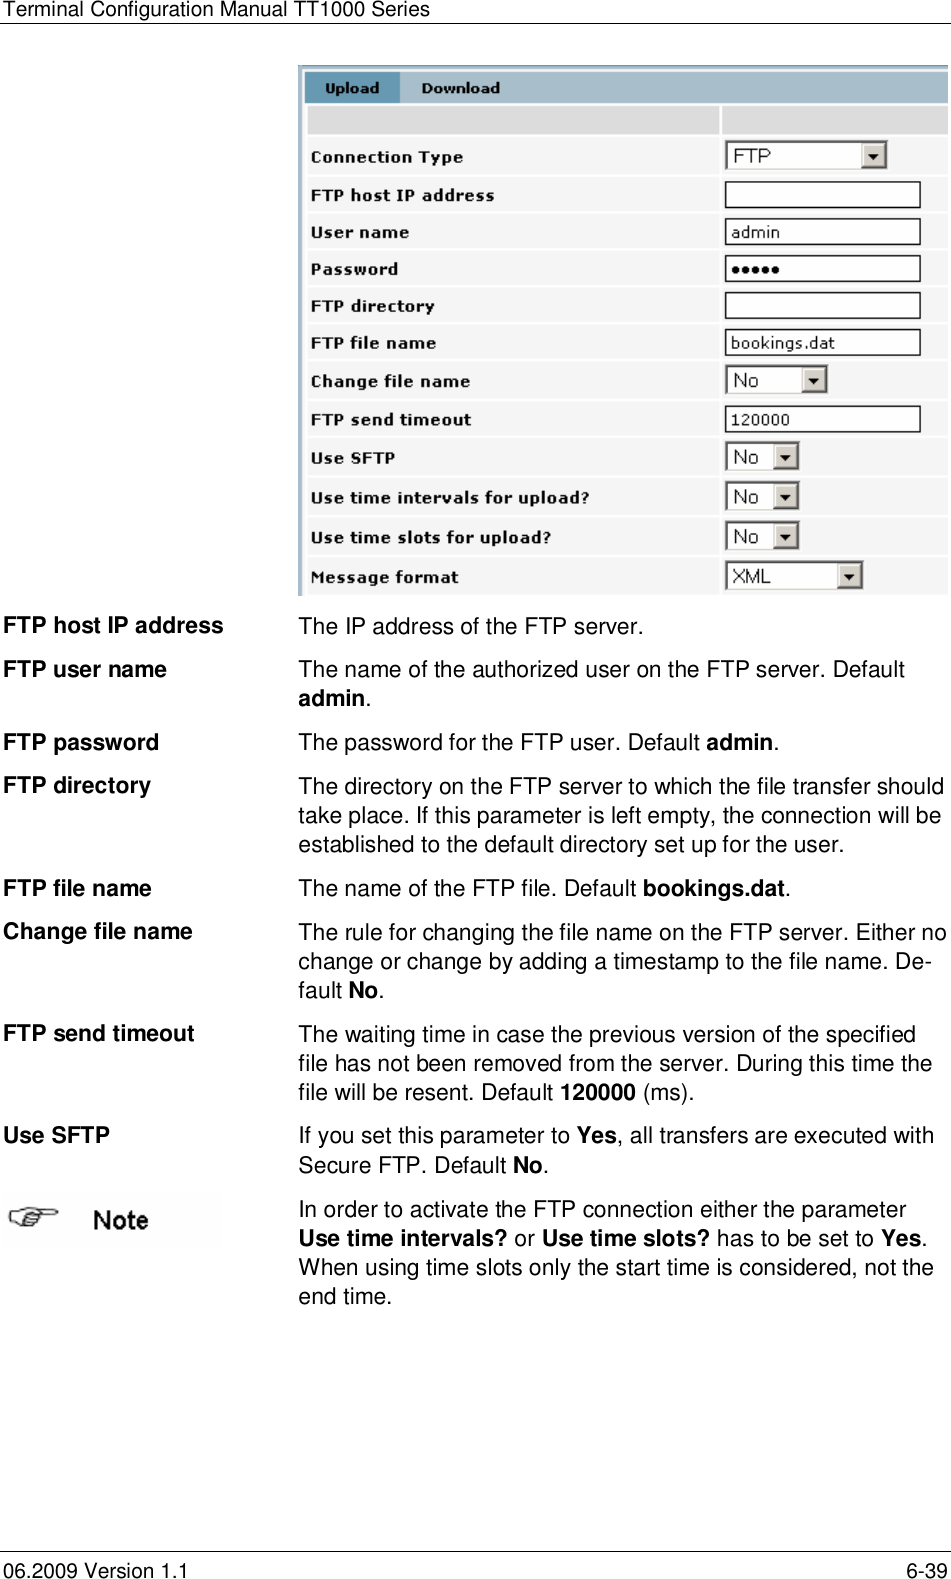 Terminal Configuration Manual TT1000 Series06.2009 Version 1.1 6-39FTP host IP address The IP address of the FTP server.FTP user name The name of the authorized user on the FTP server. Defaultadmin.FTP password The password for the FTP user. Default admin.FTP directory The directory on the FTP server to which the file transfer shouldtake place. If this parameter is left empty, the connection will beestablished to the default directory set up for the user.FTP file name The name of the FTP file. Default bookings.dat.Change file nameThe rule for changing the file name on the FTP server. Either nochange or change by adding a timestamp to the file name. De-fault No.FTP send timeout The waiting time in case the previous version of the specifiedfile has not been removed from the server. During this time thefile will be resent. Default 120000 (ms).Use SFTP If you set this parameter to Yes, all transfers are executed withSecure FTP. Default No.In order to activate the FTP connection either the parameterUse time intervals? or Use time slots? has to be set to Yes.When using time slots only the start time is considered, not theend time.